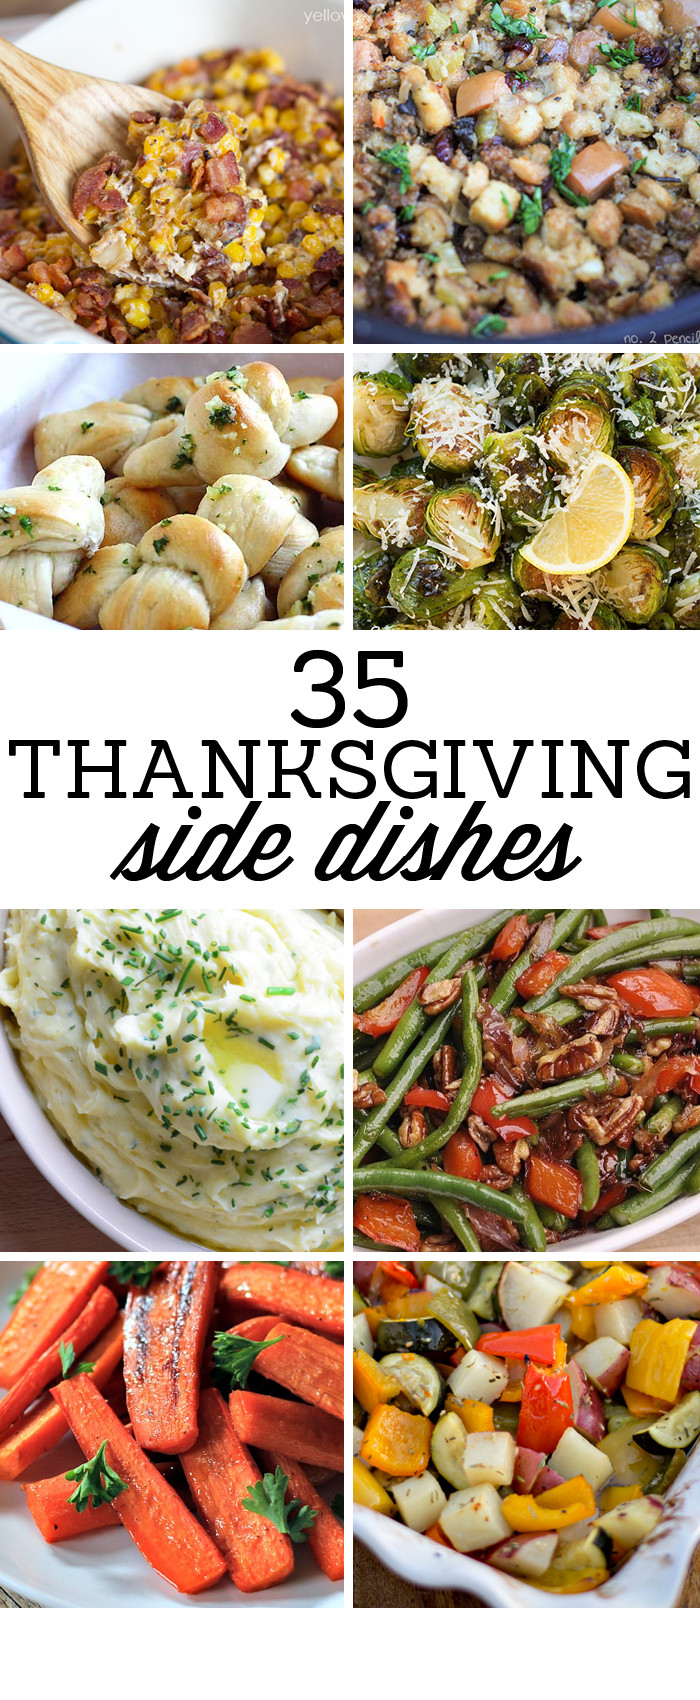 Thanksgiving Side Dishes
 35 Side Dishes for Christmas Dinner Yellow Bliss Road